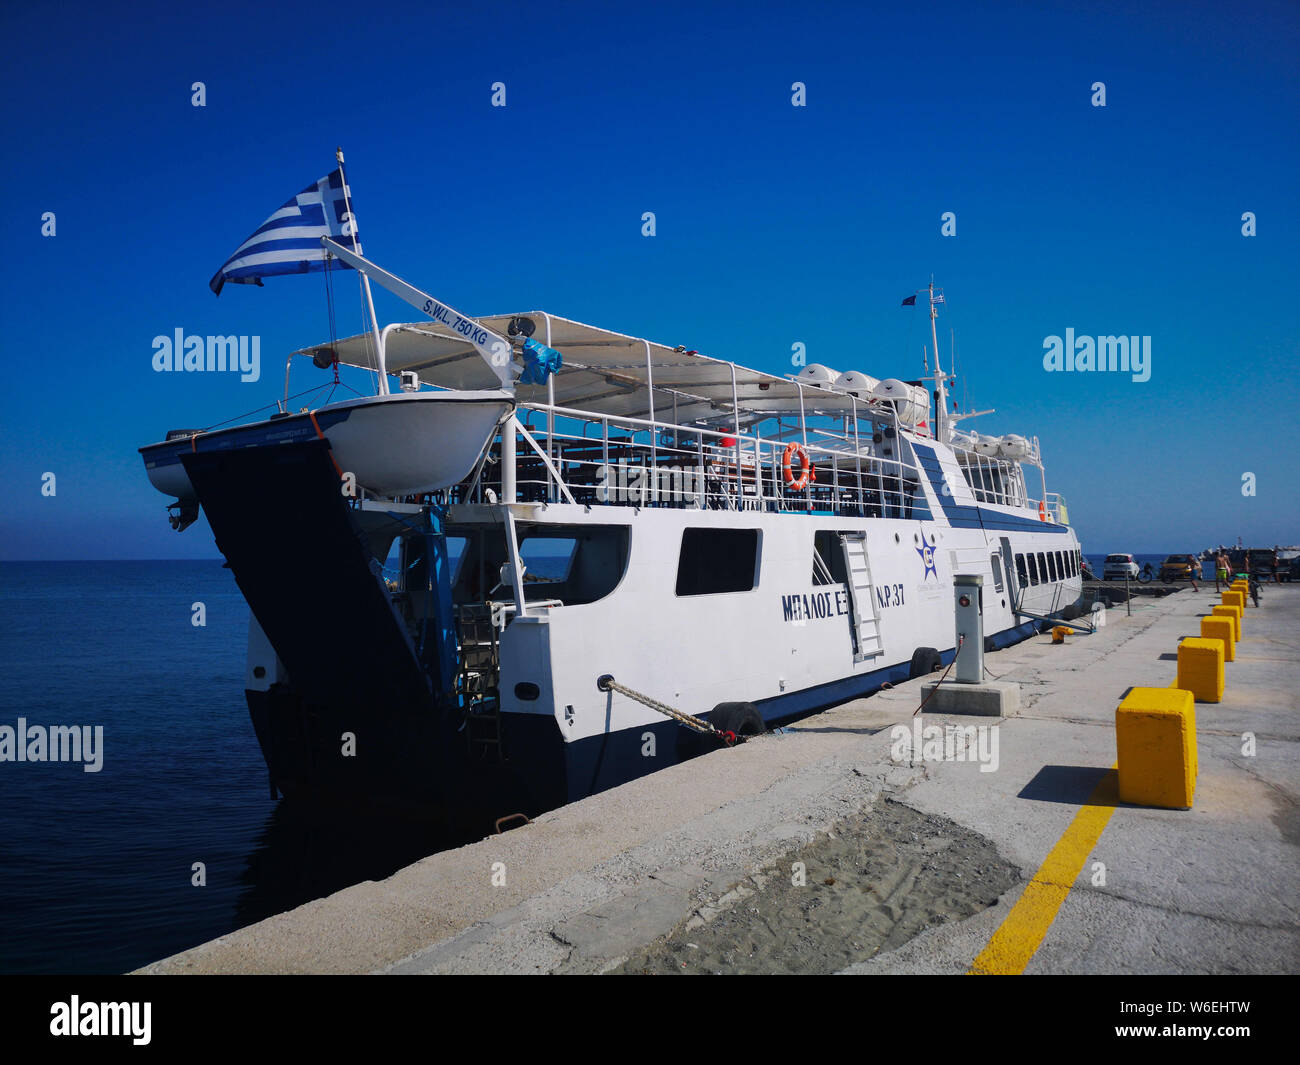 June 12, 2019: The harbour in Heraklion with the Venetian fortress Credit: Abdelwaheb Omar/IMAGESLIVE/ZUMA Wire/Alamy Live News Stock Photo